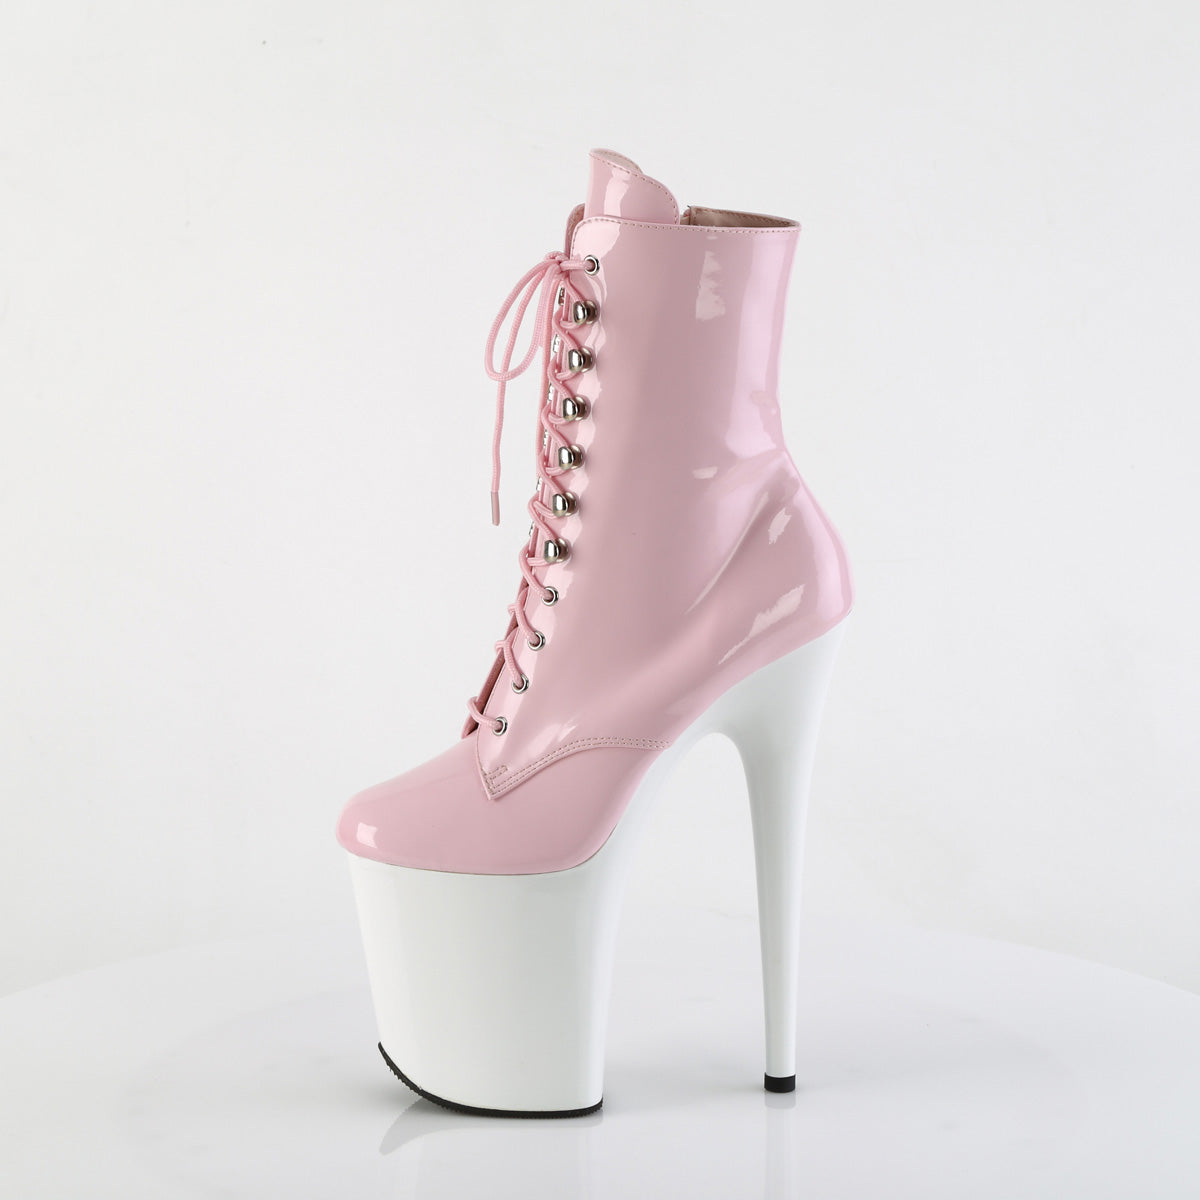 FLAMINGO-1020 Pleaser Ankle Boots B. Pink Platforms (Exotic Dancing)